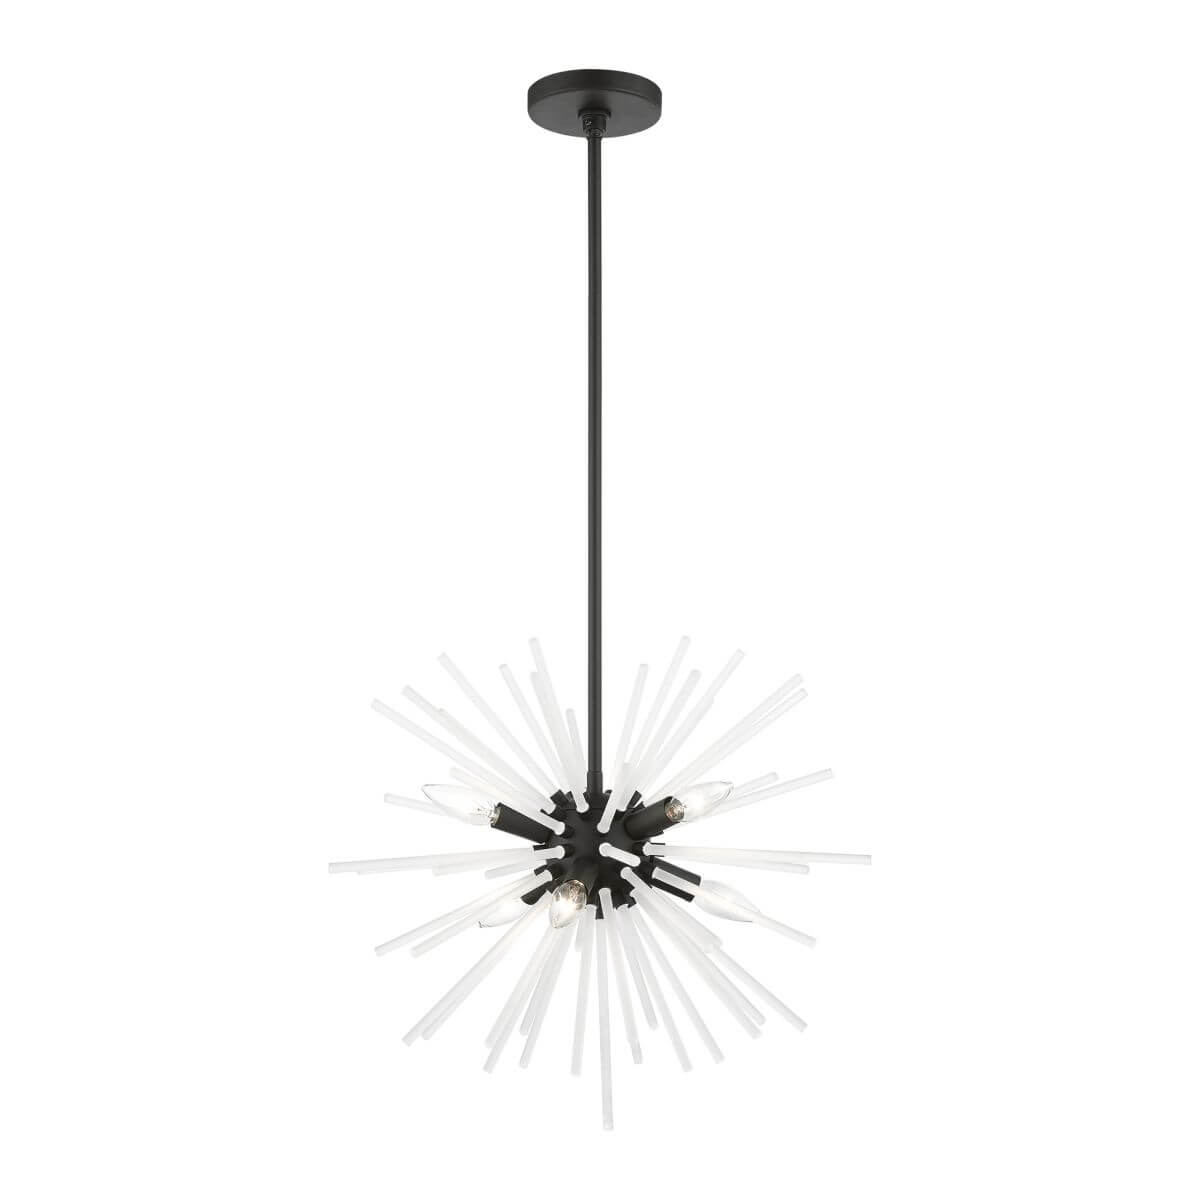 Livex 48824-04 Uptown 6 Light 20 inch Chandelier in Black with Acid Etched Rods